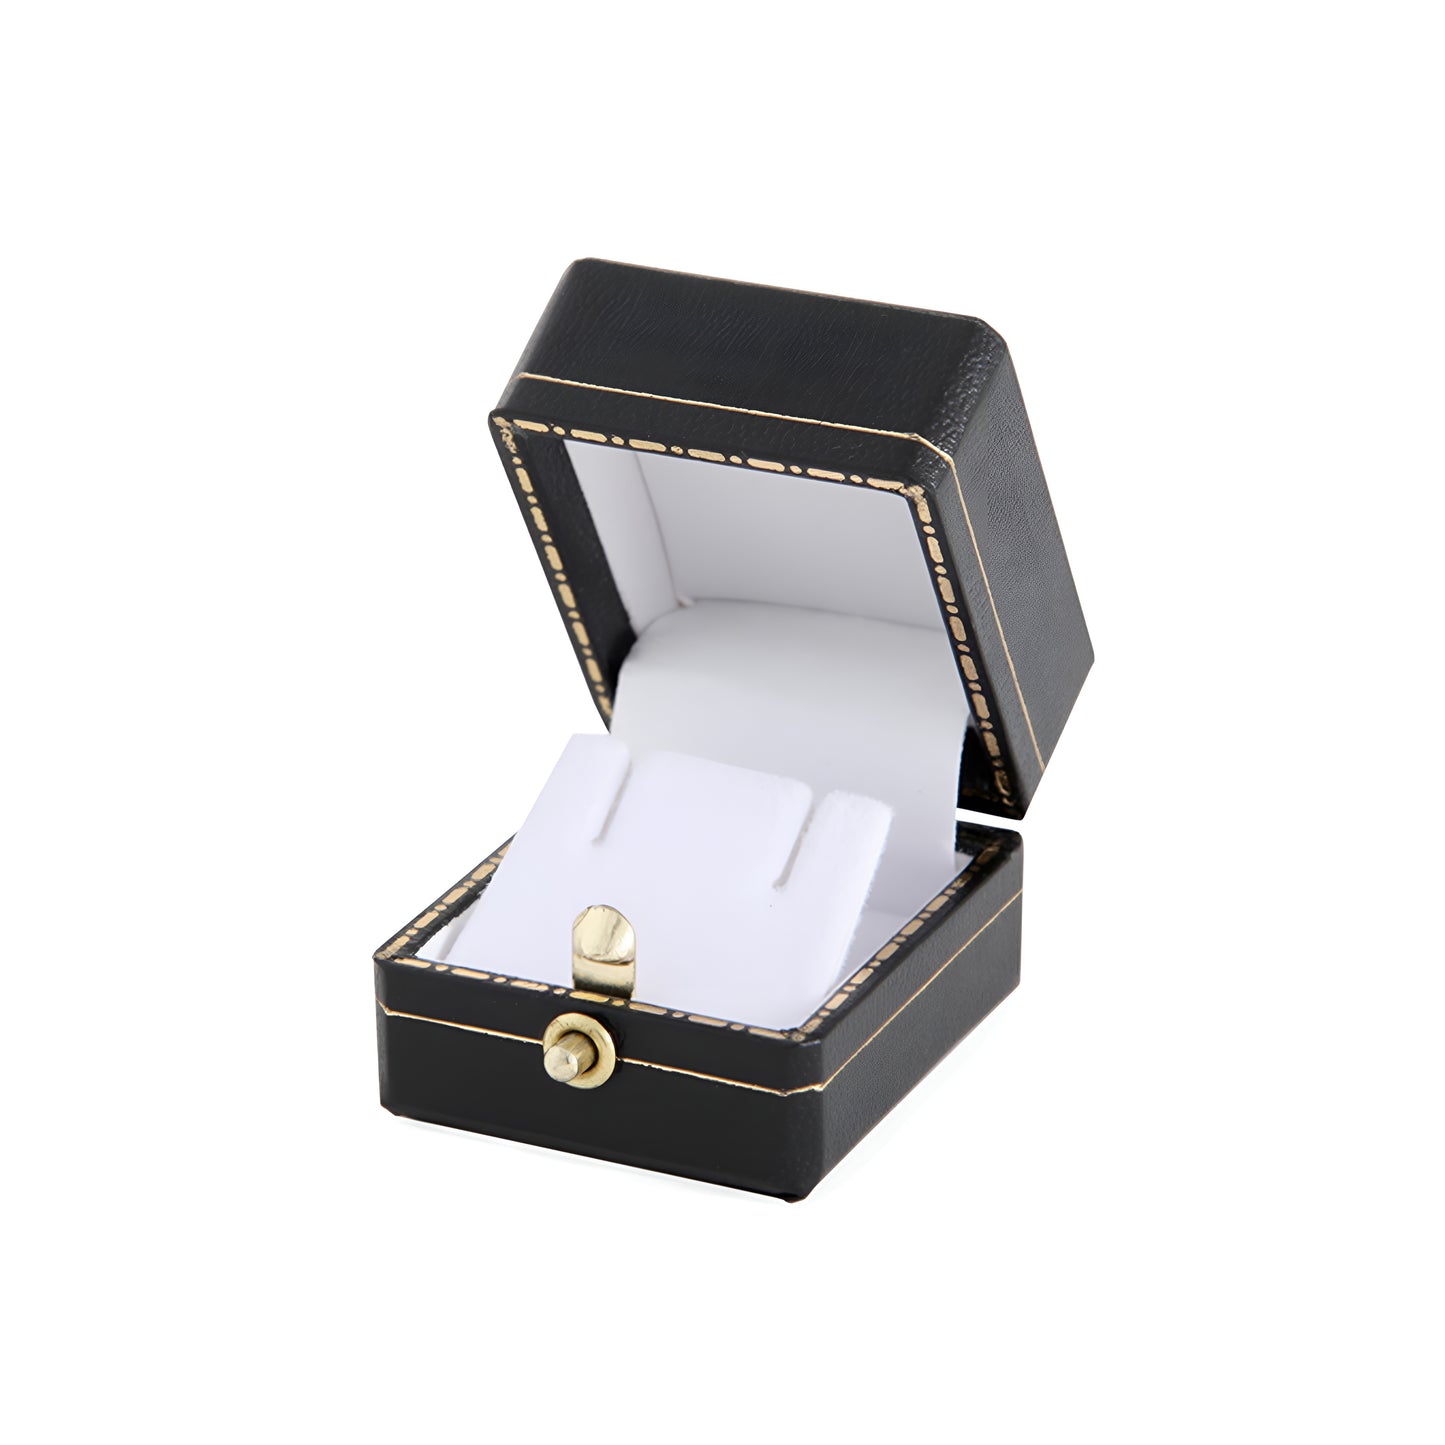 Venice Stud Earring Boxes (Pack of 6)